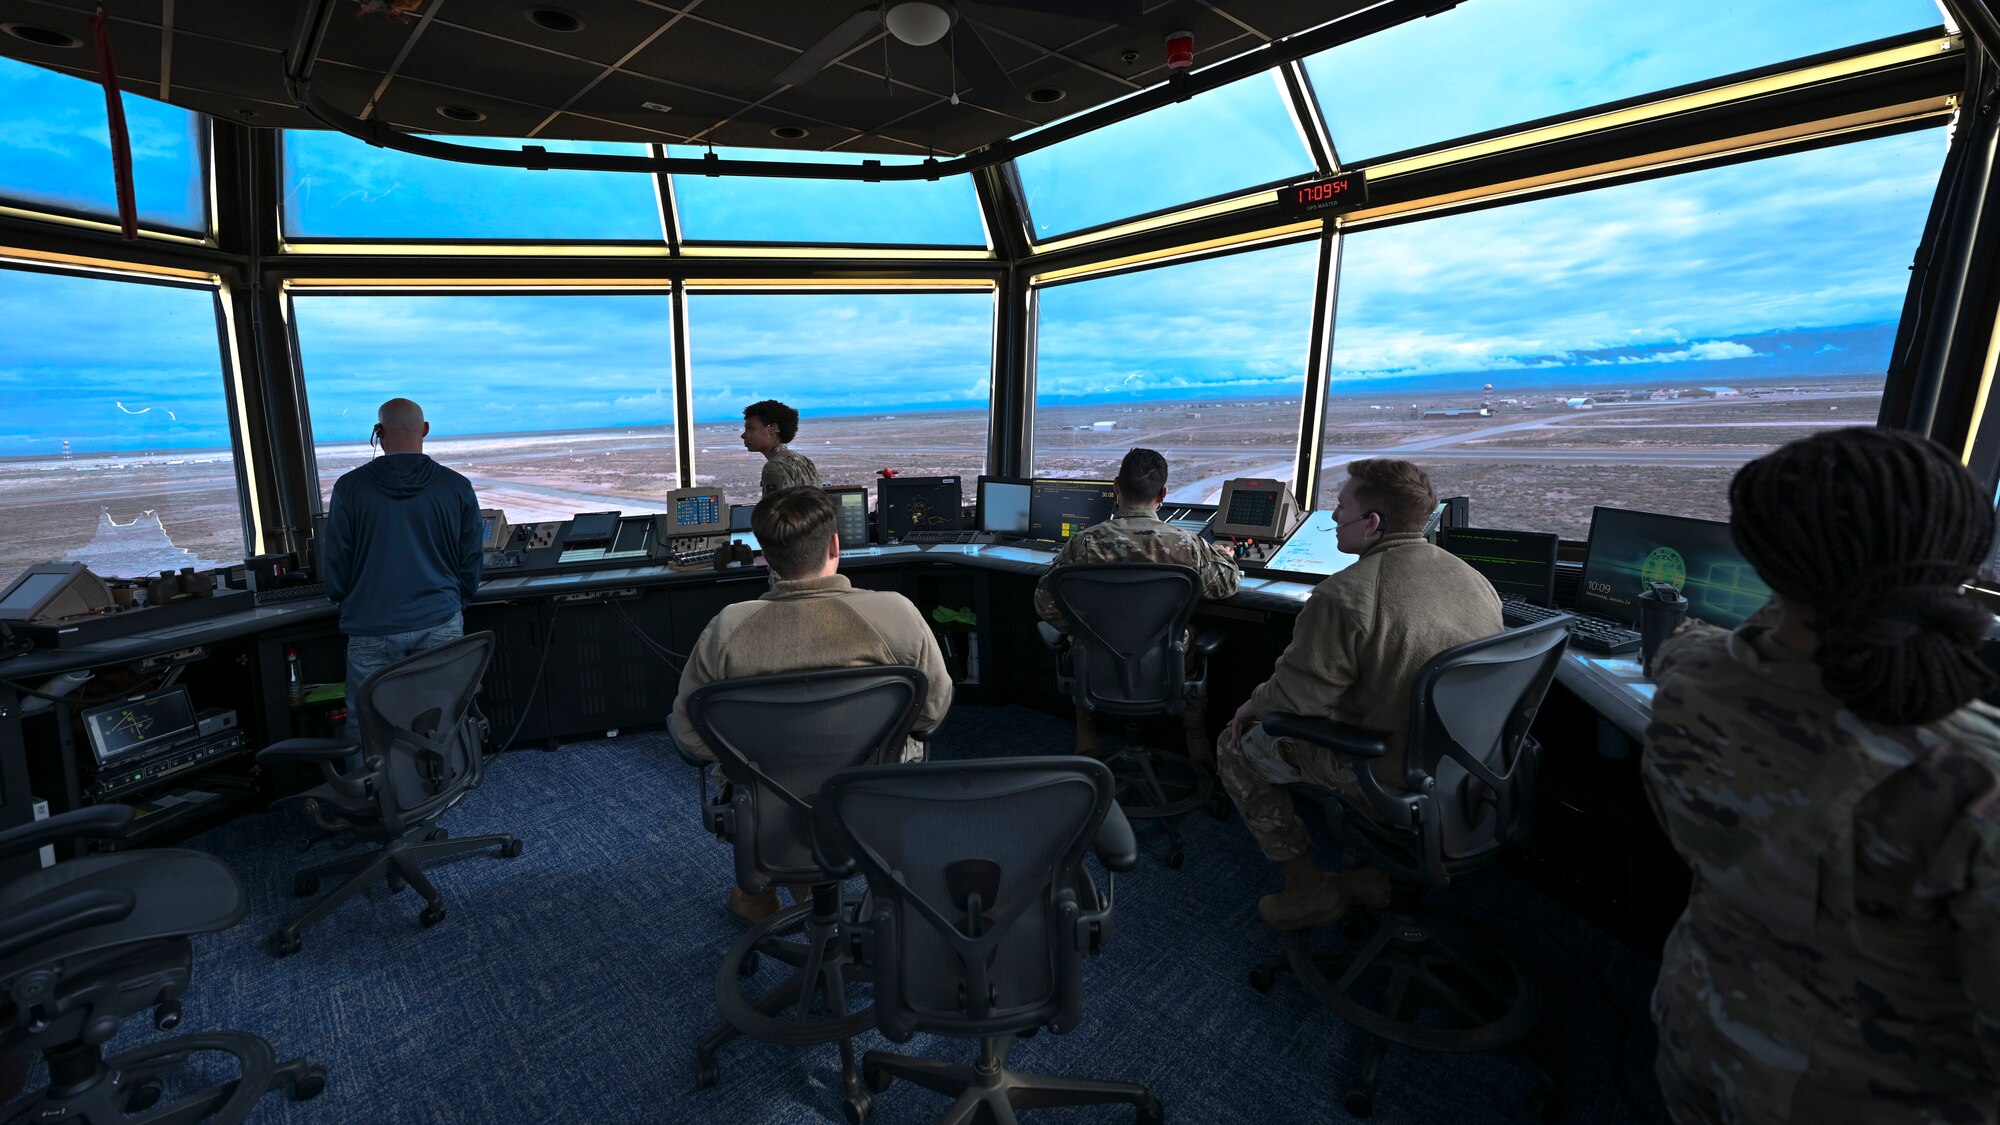 Members from the 54th Operations Support Squadron monitor aircraft movement on the flightline at Holloman Air Force Base, New Mexico, Jan. 24, 2024. ATC’s transmit and listen to multiple frequencies at one time and are responsible for separating and directing aircraft movement during all flightline operations. (U.S. Air Force photo by Airman 1st Class Michelle Ferrari)